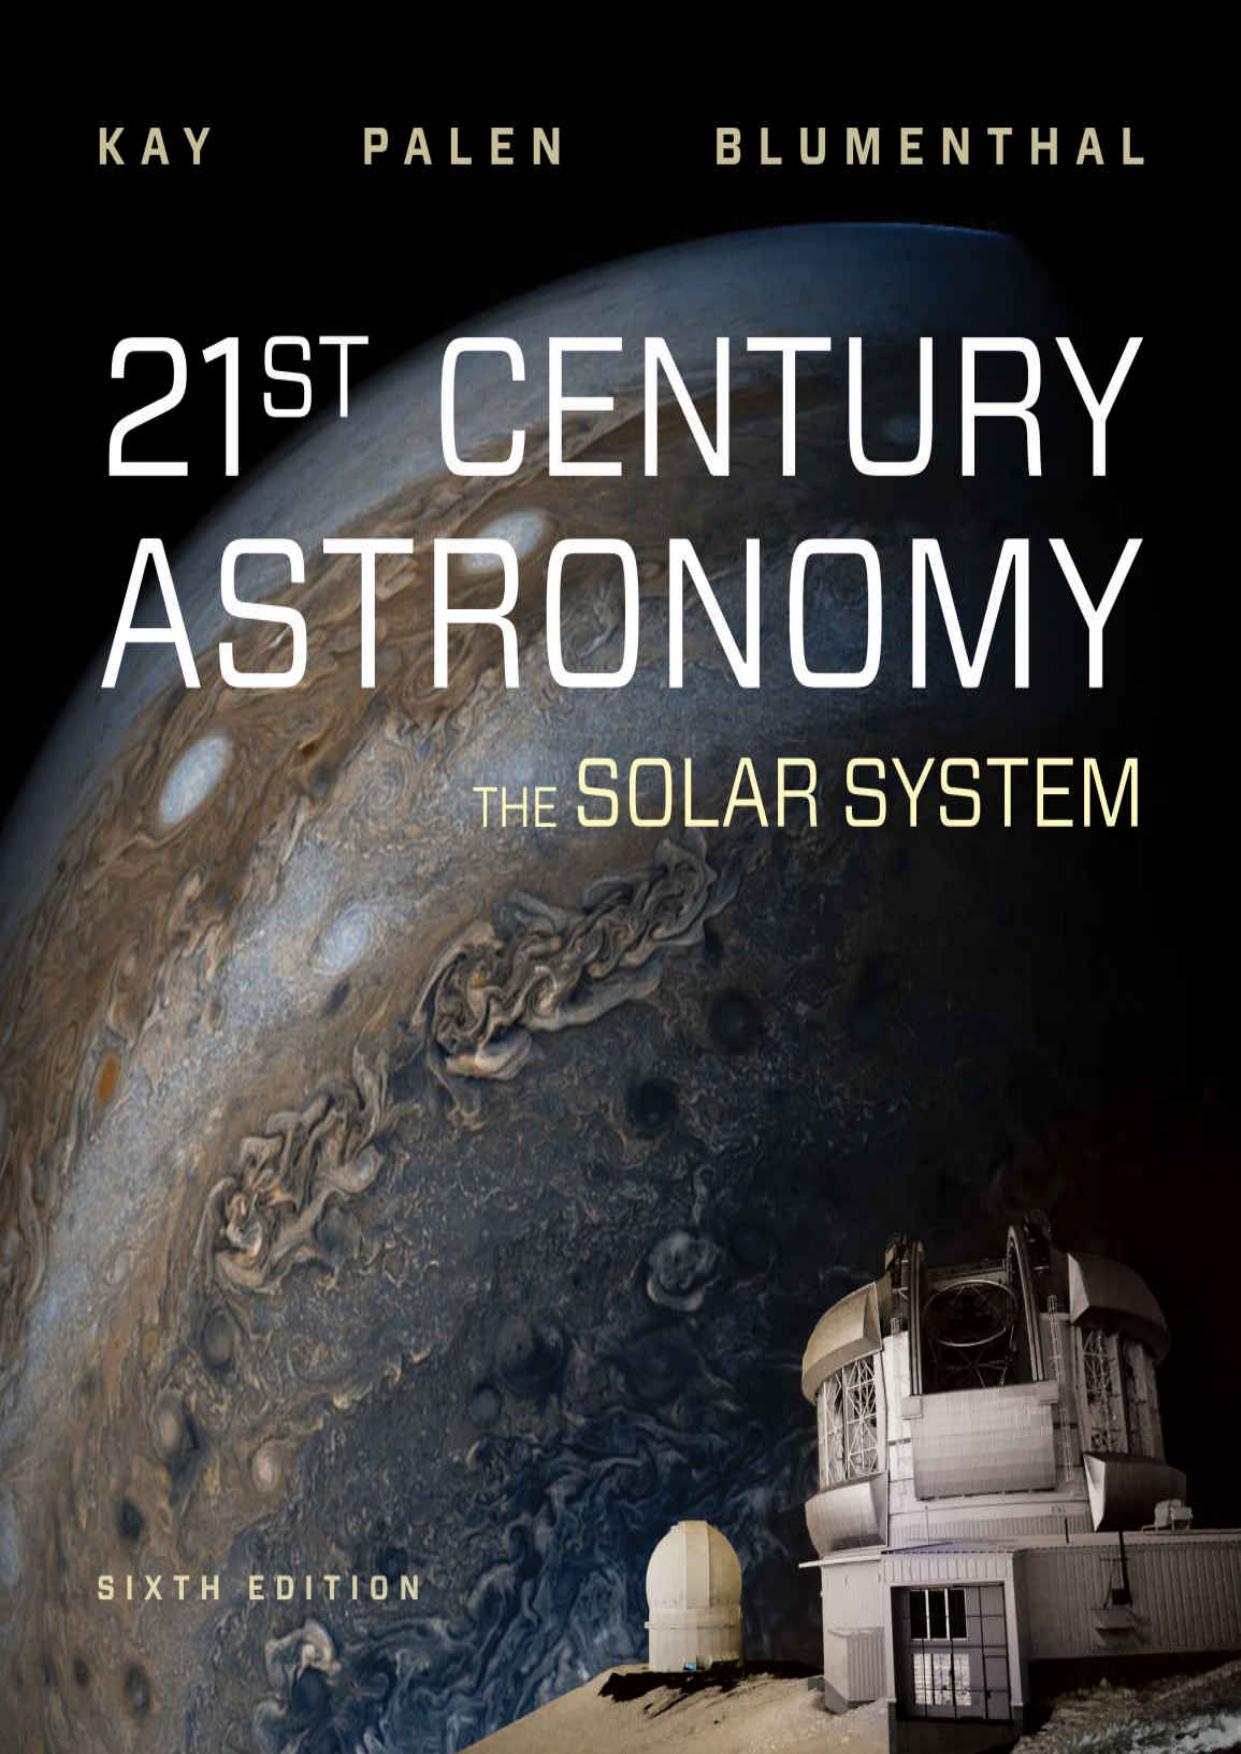 21st Century Astronomy_ The Solar System 6th (Sixth Edition) - Laura Kay & Stacy Palen & George Blumenthal.jpg